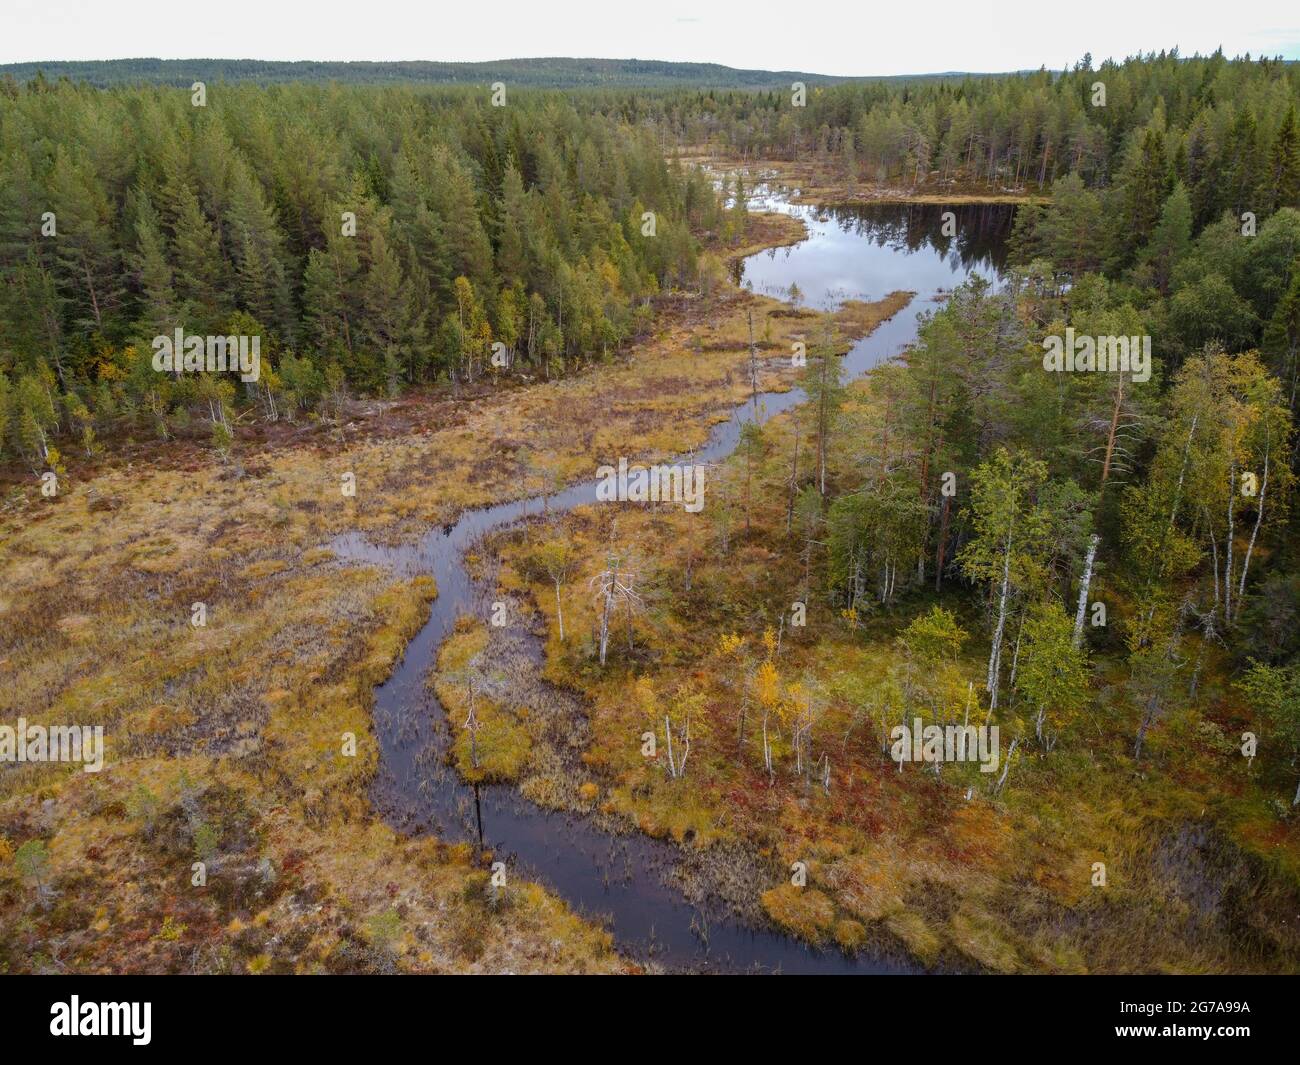 Stream in a swampy forest area in autumn near Hamra National Park, Sweden Stock Photo